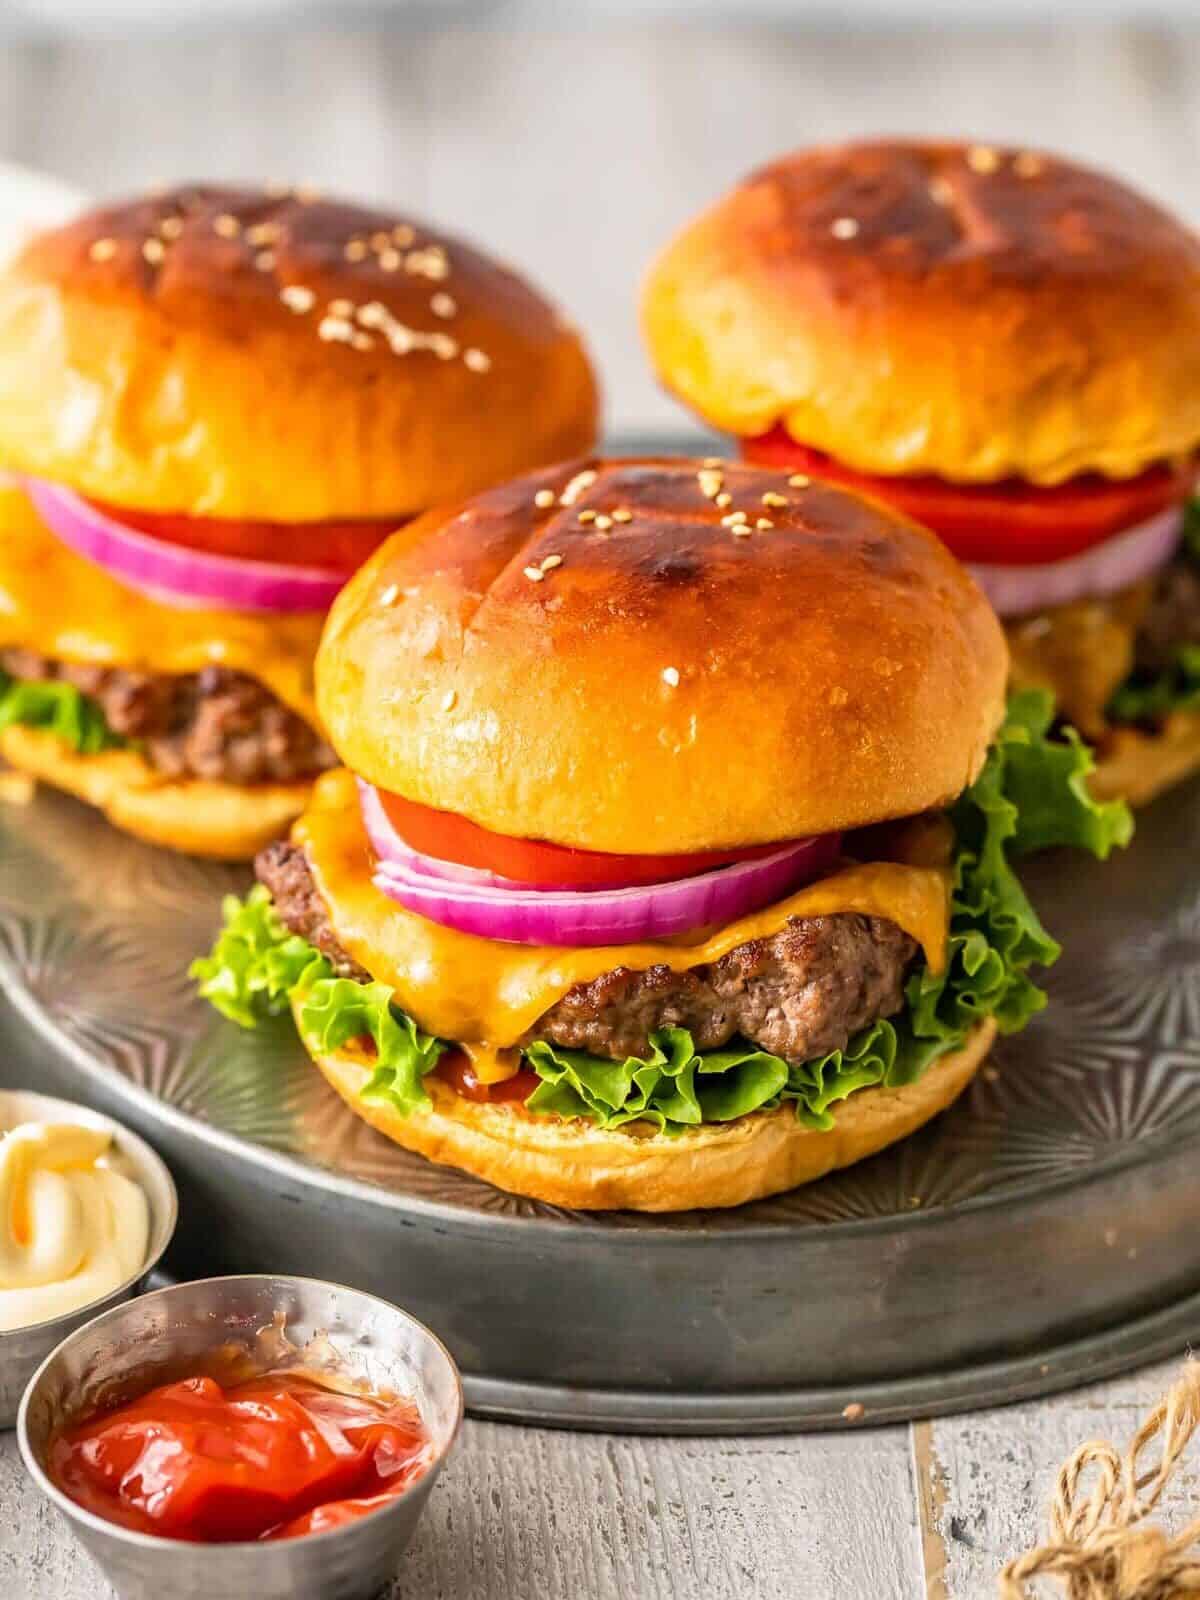 broiled hamburgers on buns with cheese and toppings